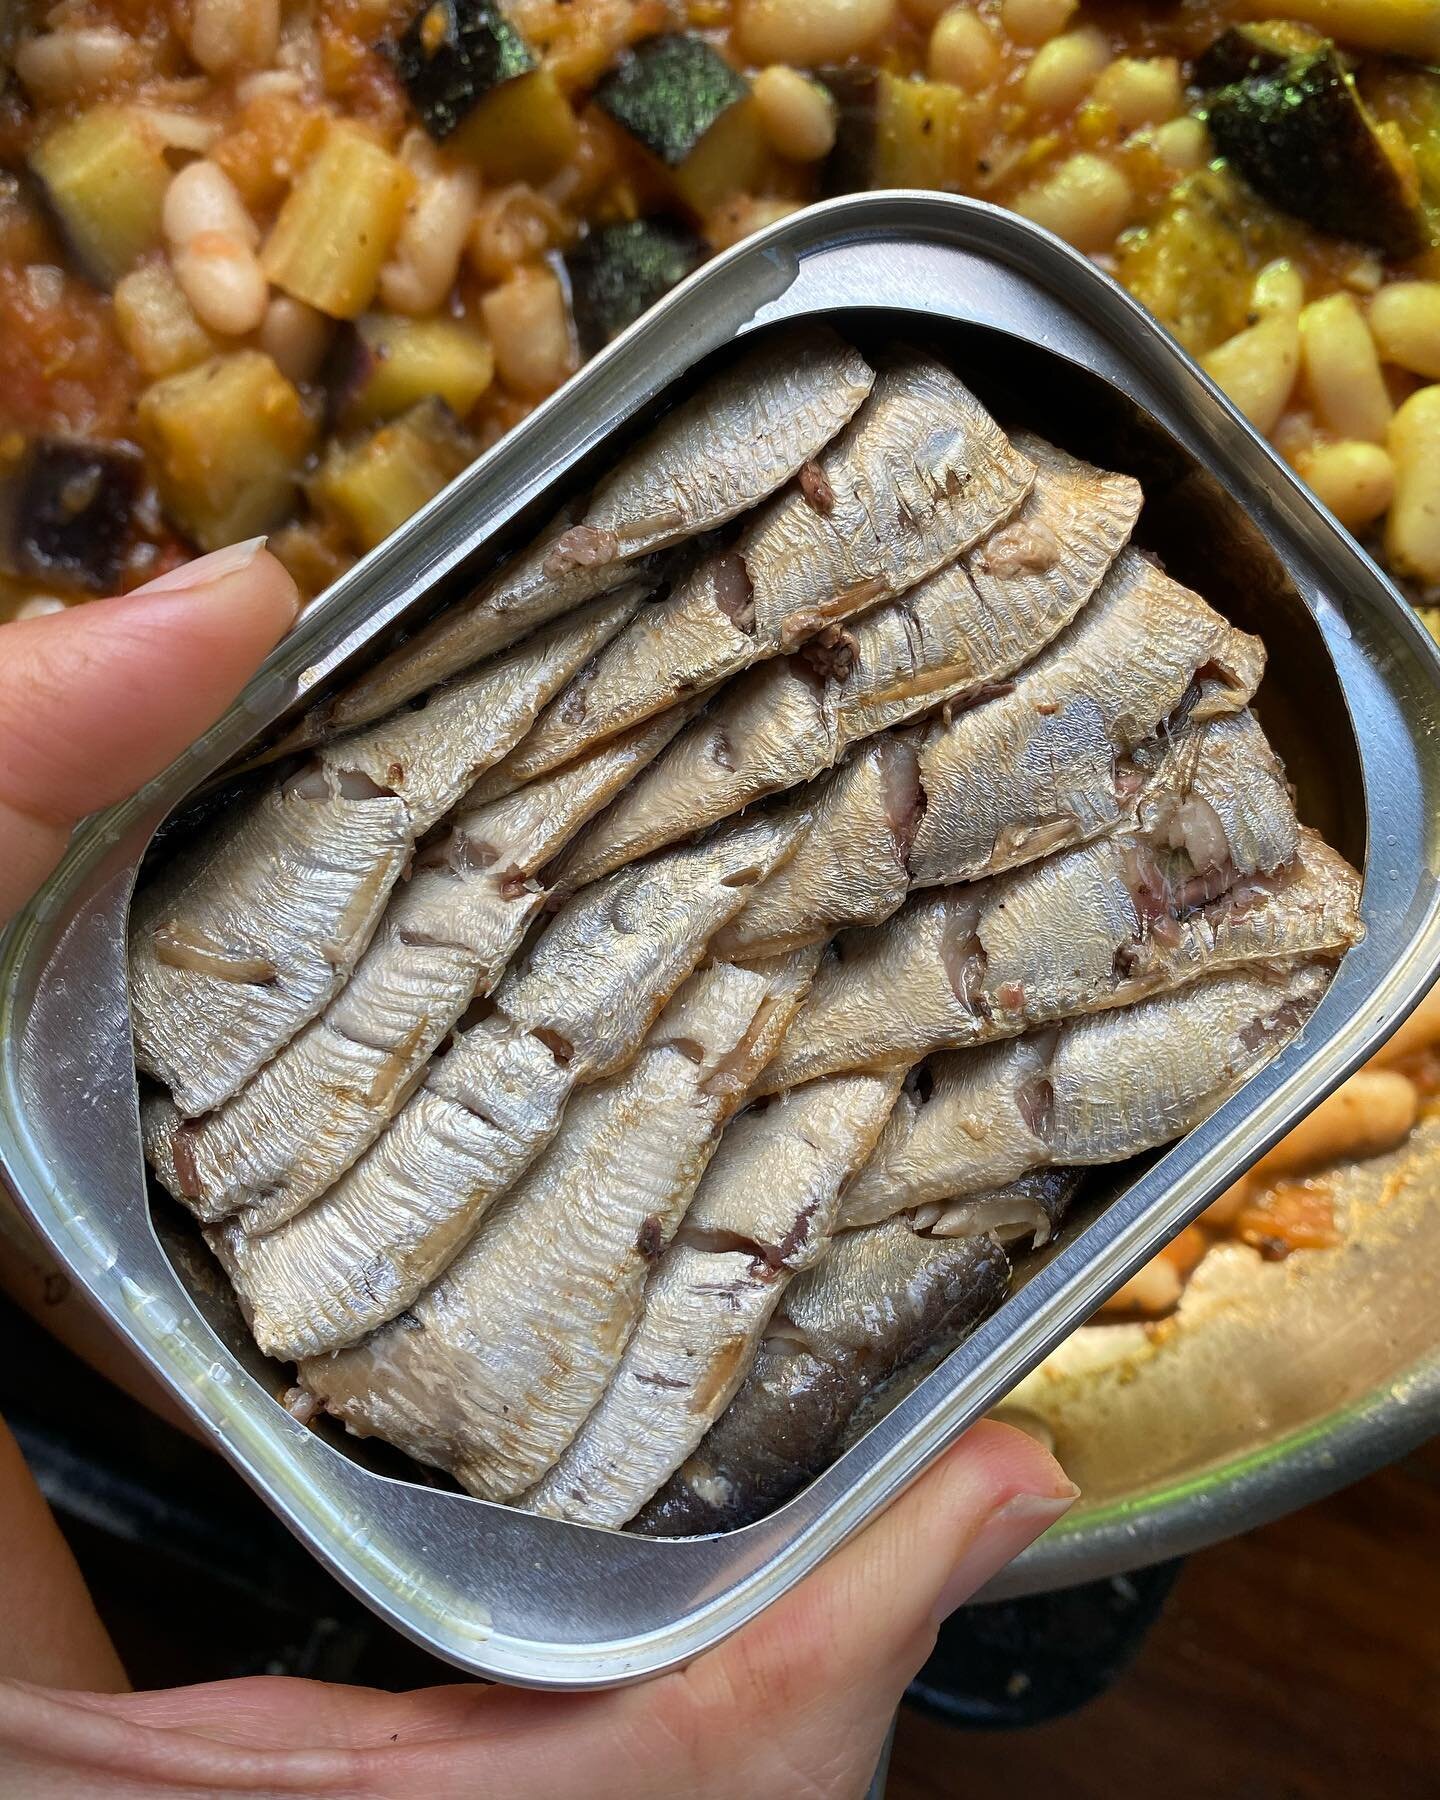 Adding an extra boost of calcium, protein and omega-3s to our lunch today 🐟 These wild caught sprats are much milder in flavour than sardines, so I like adding them to dishes that they would otherwise overpower. We had these with cannellini beans br